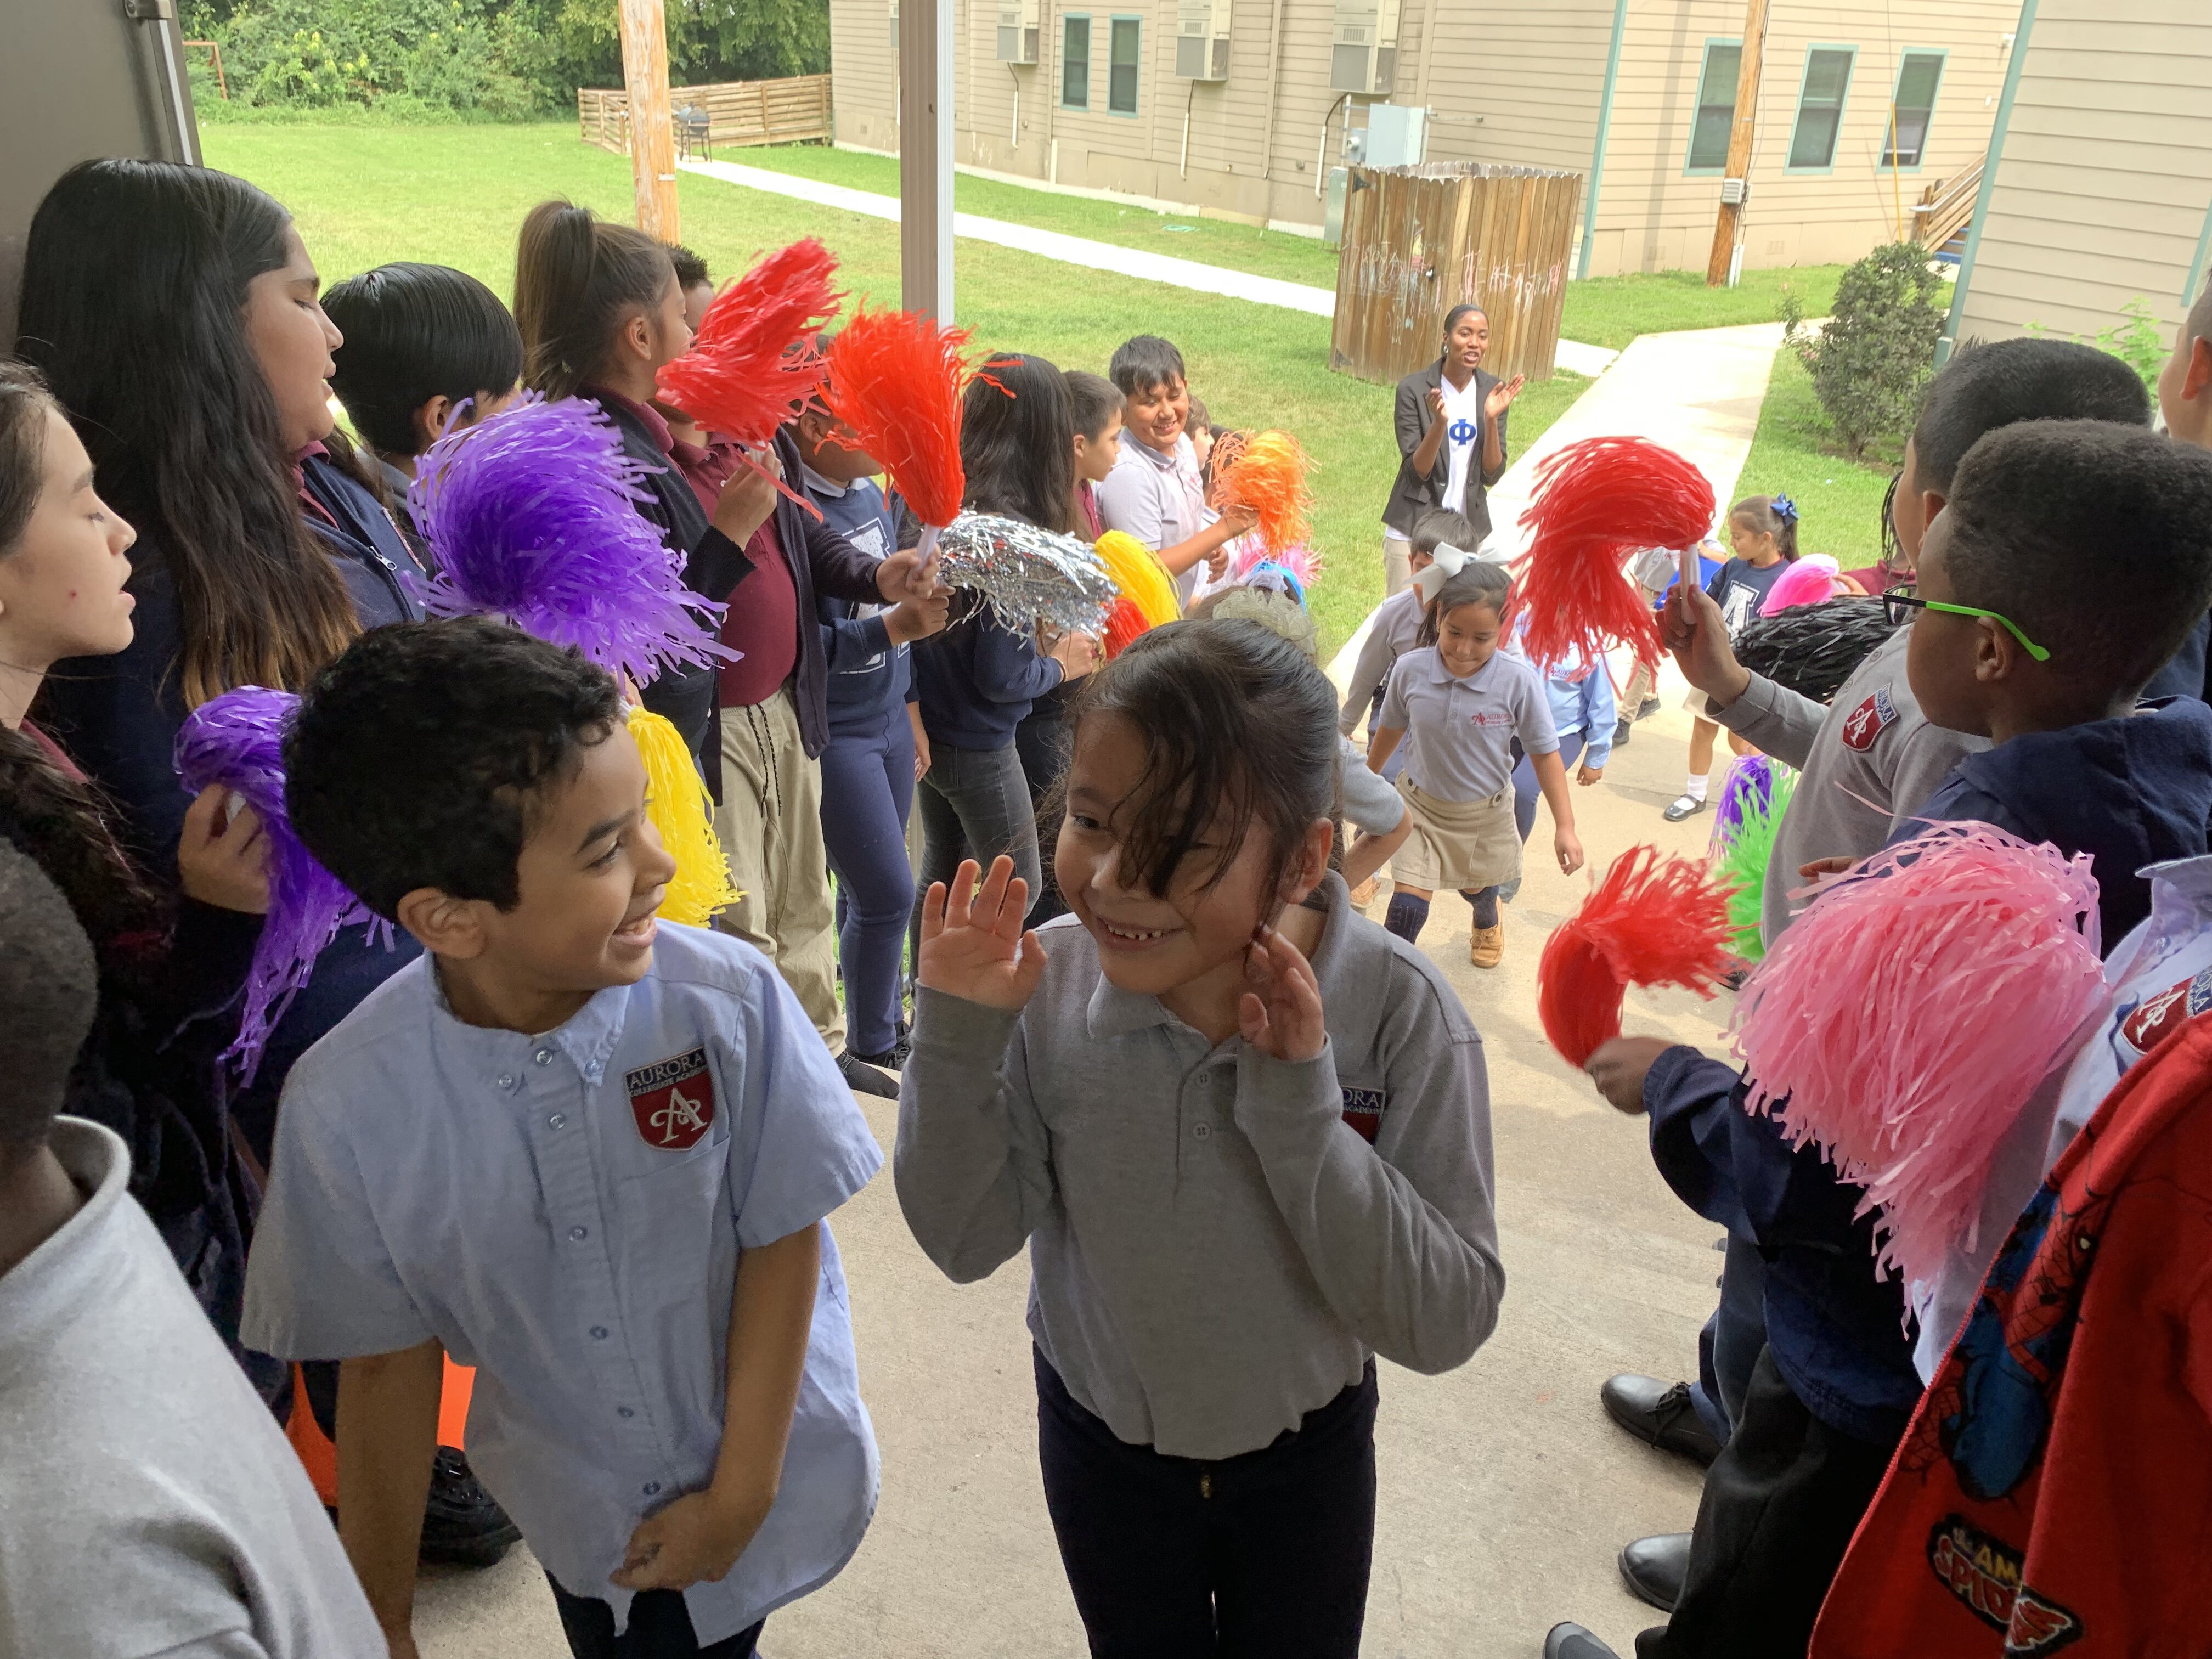 Fifth-grade scholars cheer on K-2 scholars as they head into their Friday Community Meeting. Gonzalo Munguia Lopez Jr. (center, left) and Yoselin Garcia (center, right) share an excited smile. (Cat Evans)